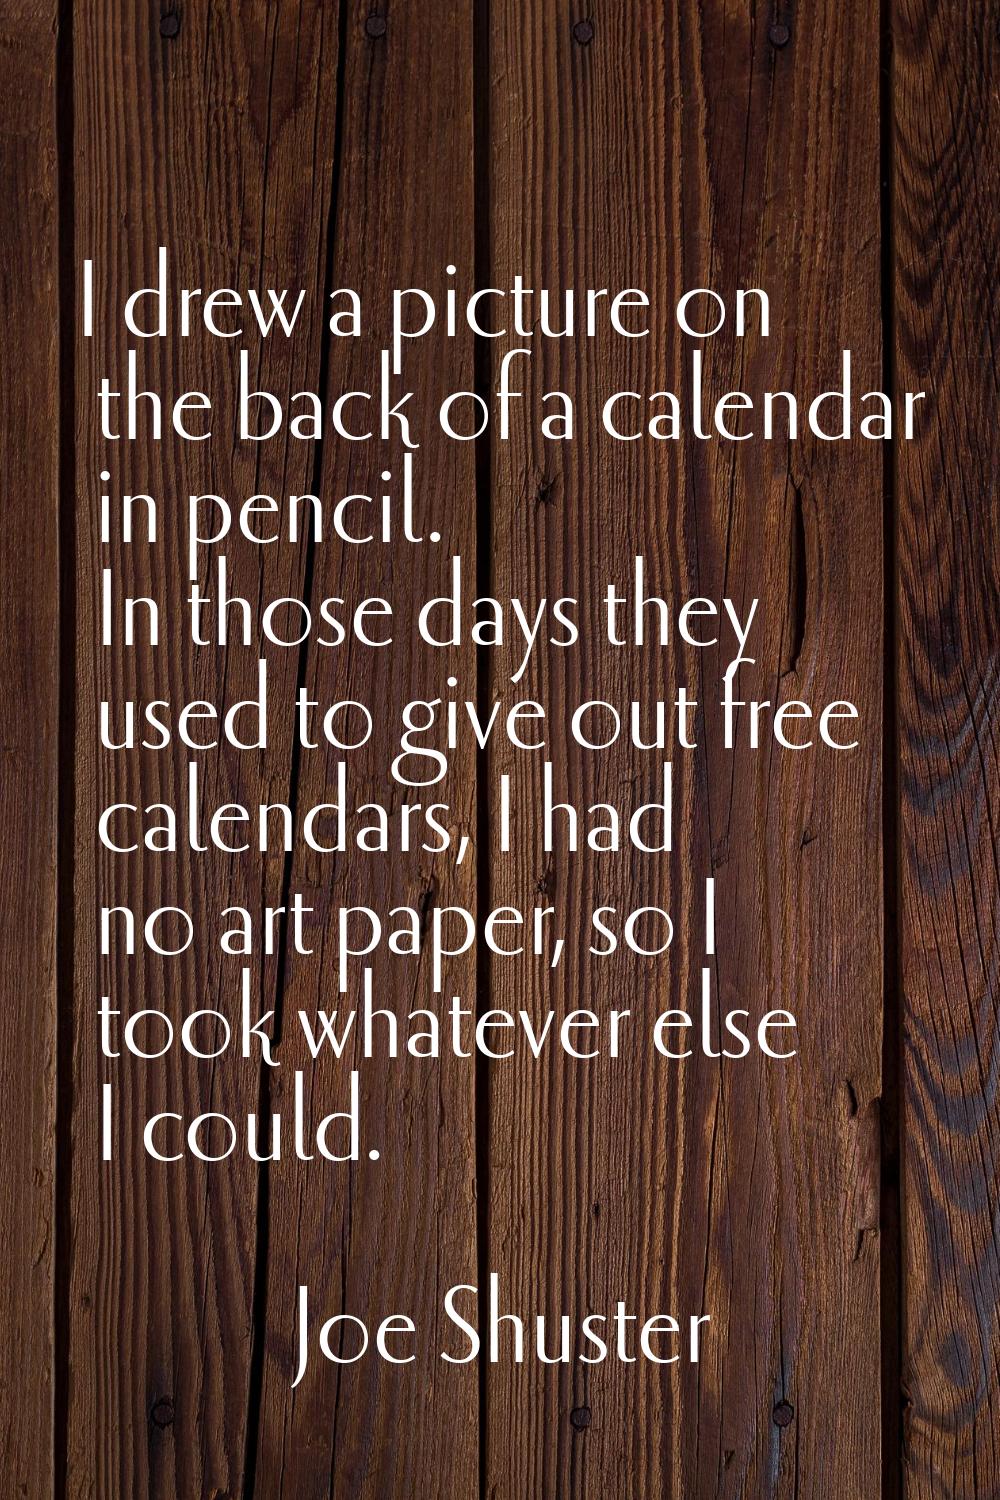 I drew a picture on the back of a calendar in pencil. In those days they used to give out free cale